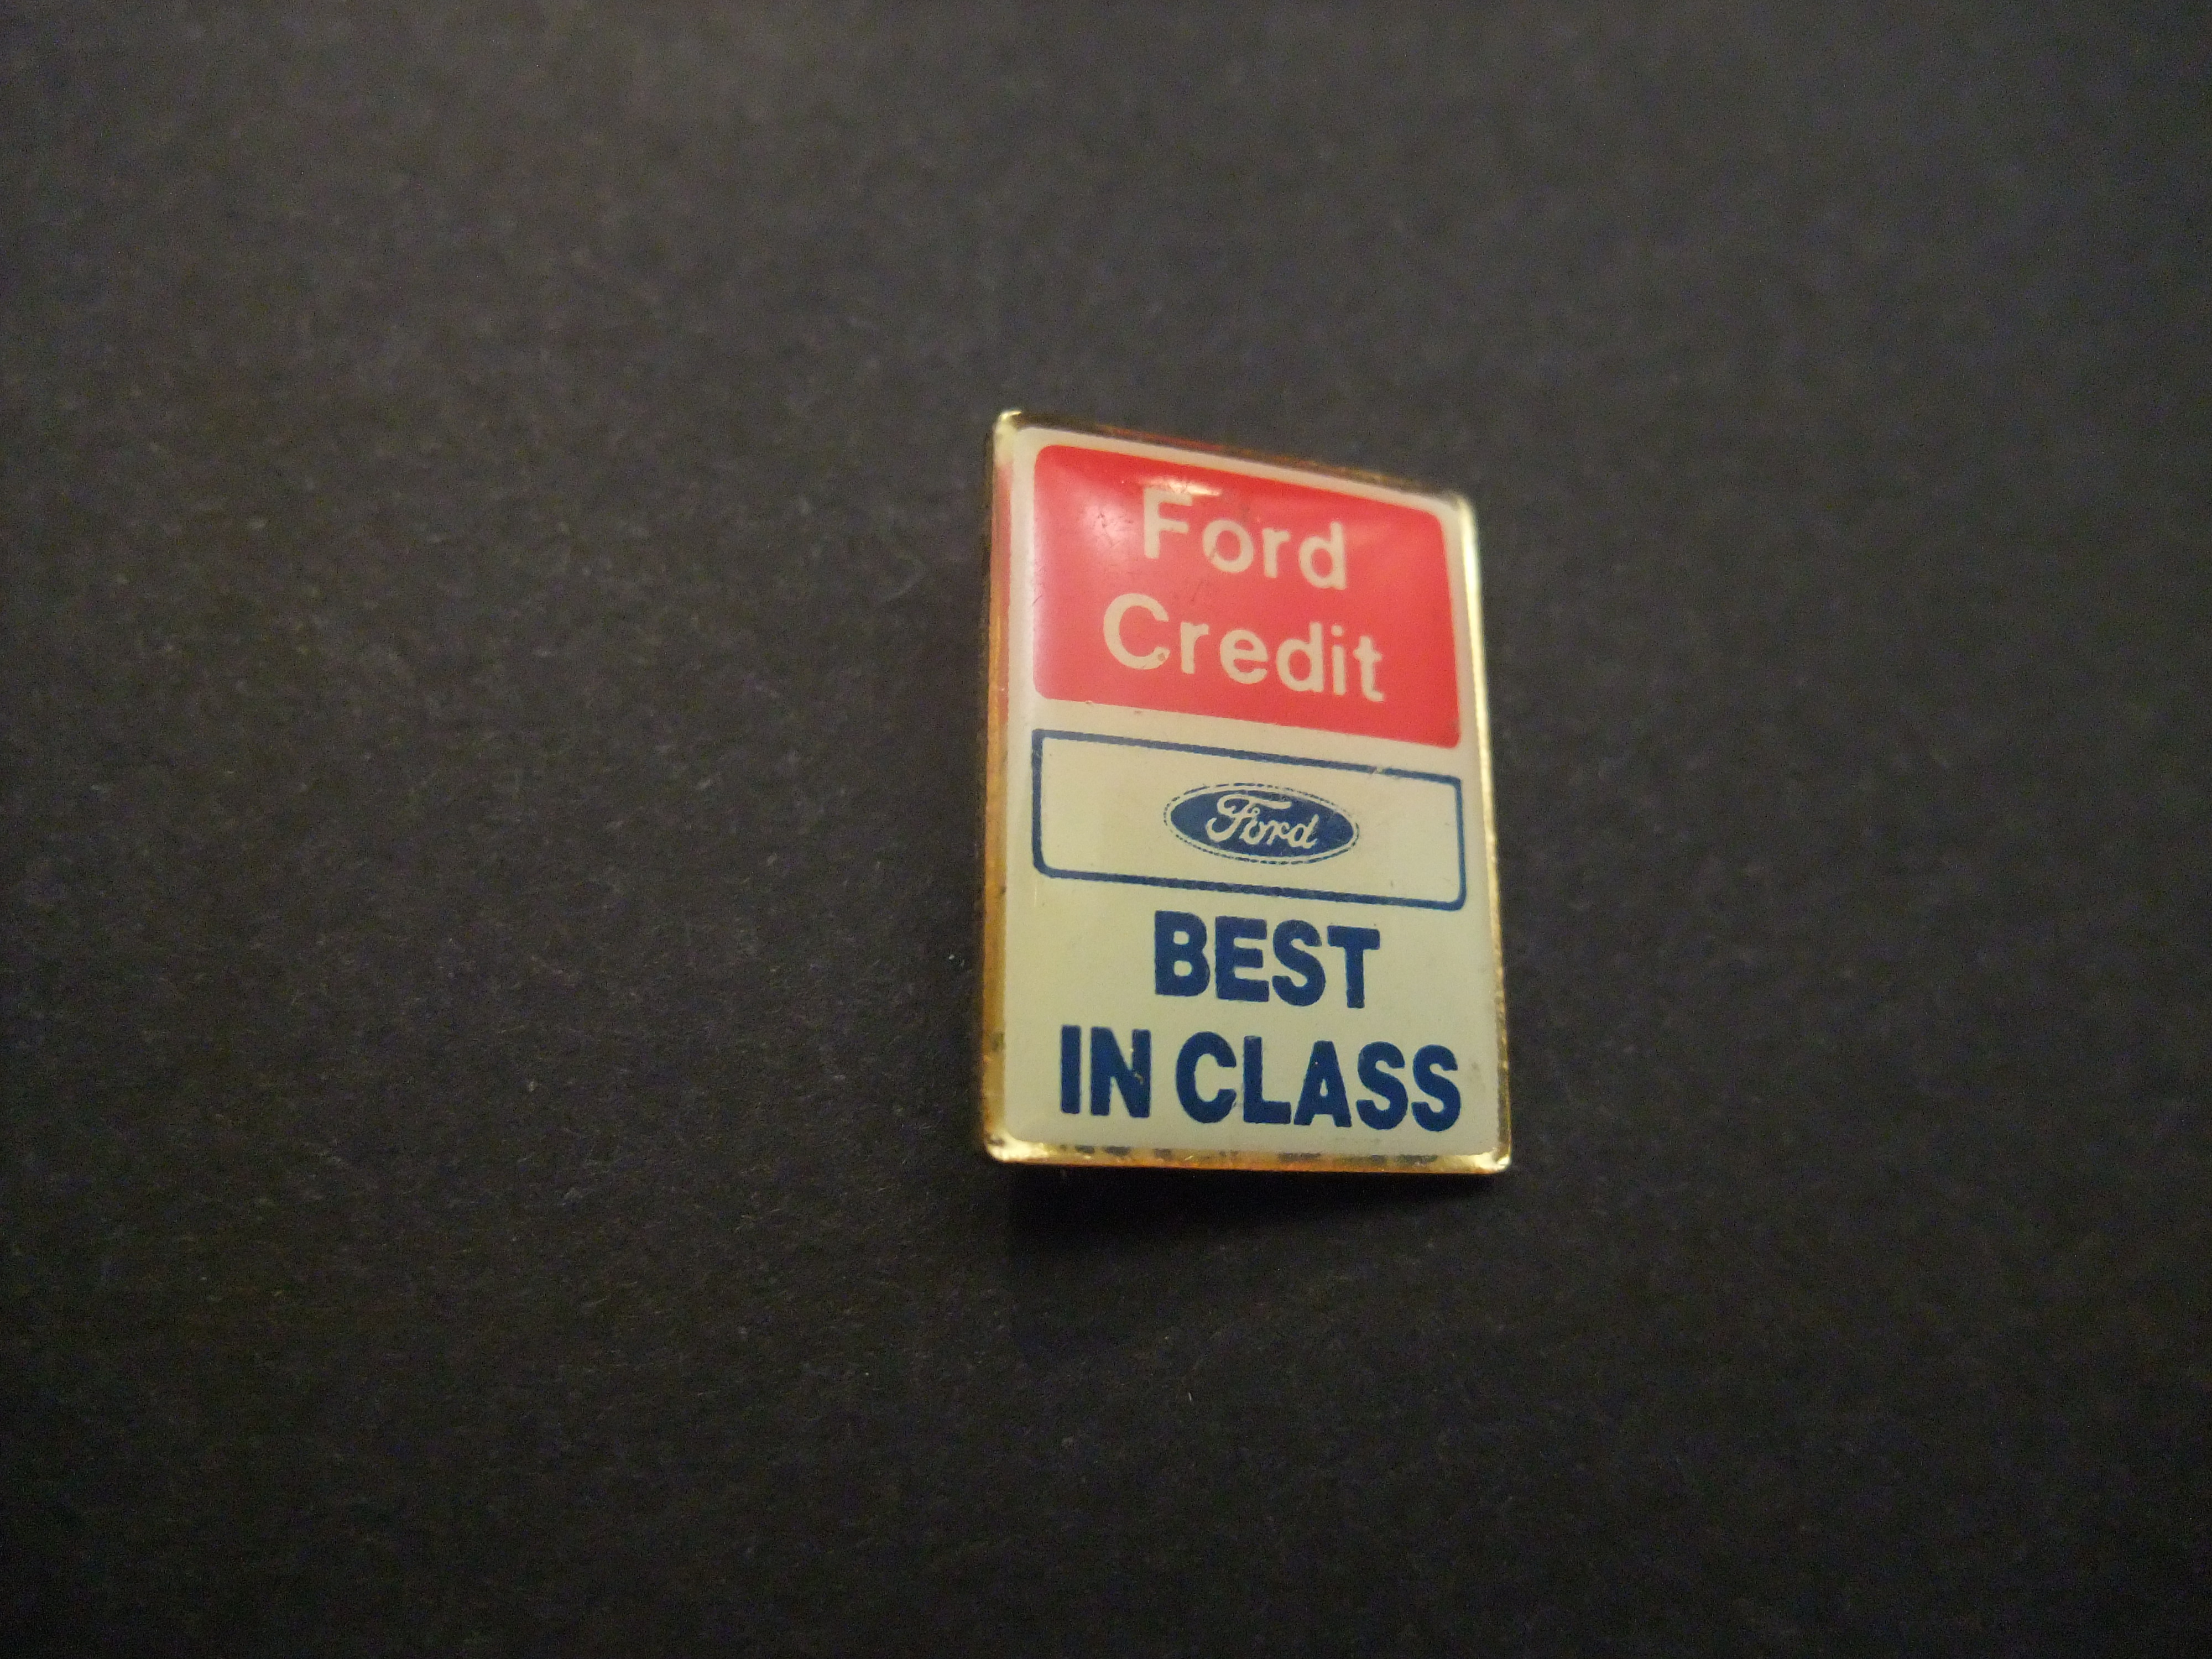 Ford Credit Best in Class